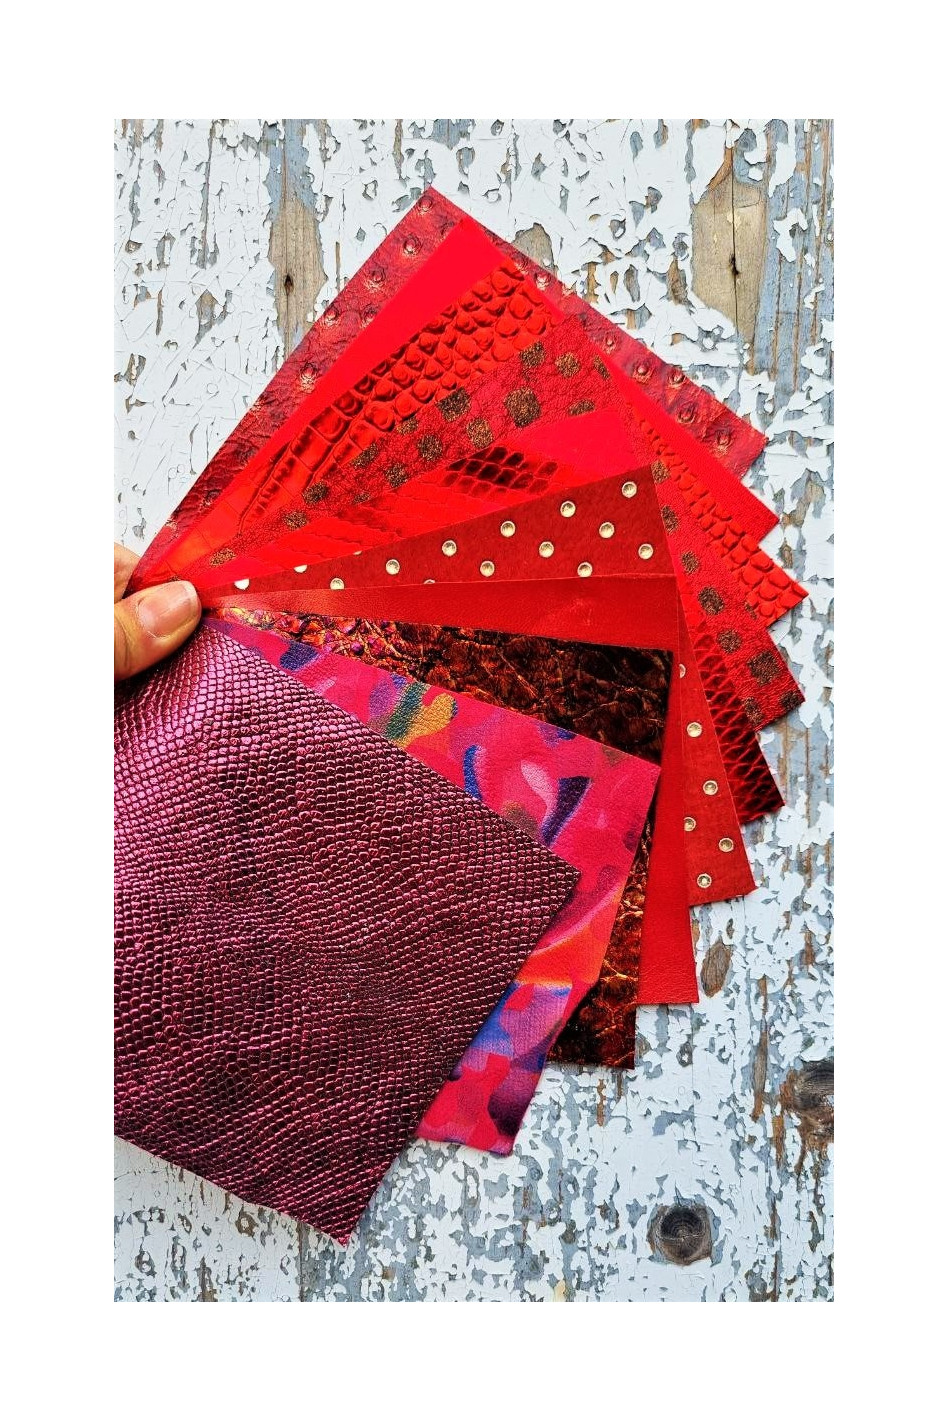 10 Selected leather scraps, RED tones, mix colorful selection leather  remnants as per pictures